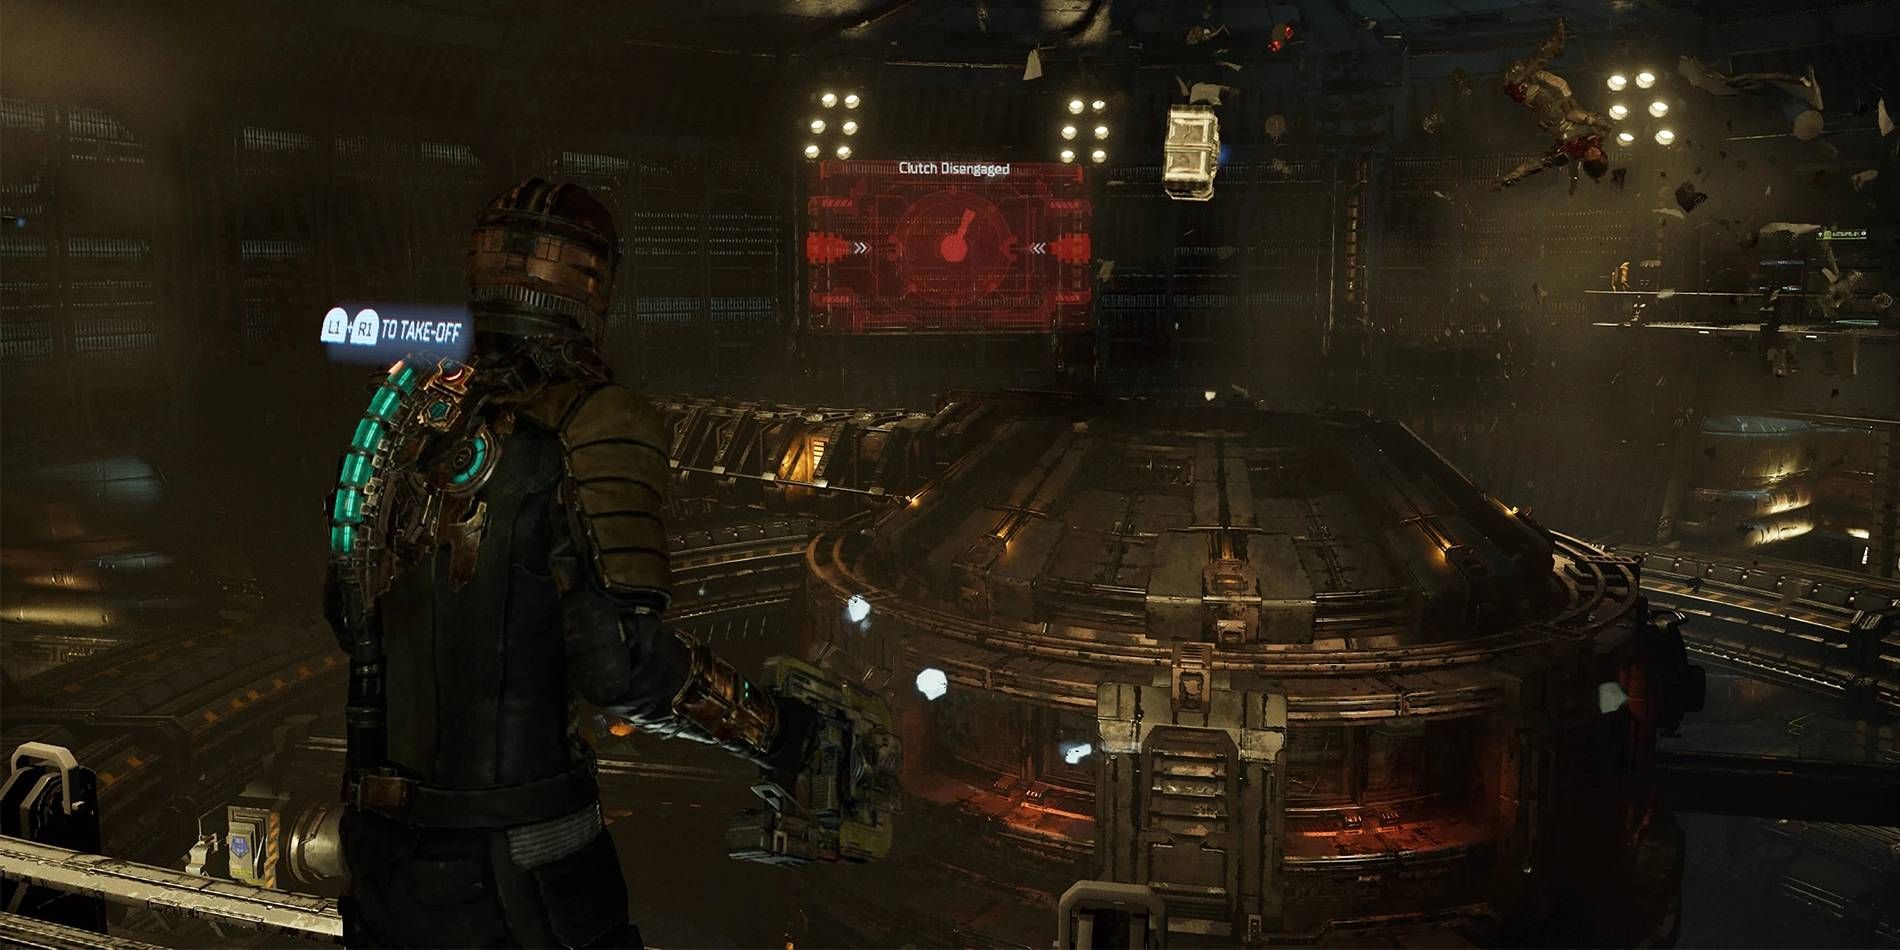 Dead Space Remake Centrifuge Puzzle Room with Disabled Machinery in Front and Isaac Ready to Take Off in Zero Gravity